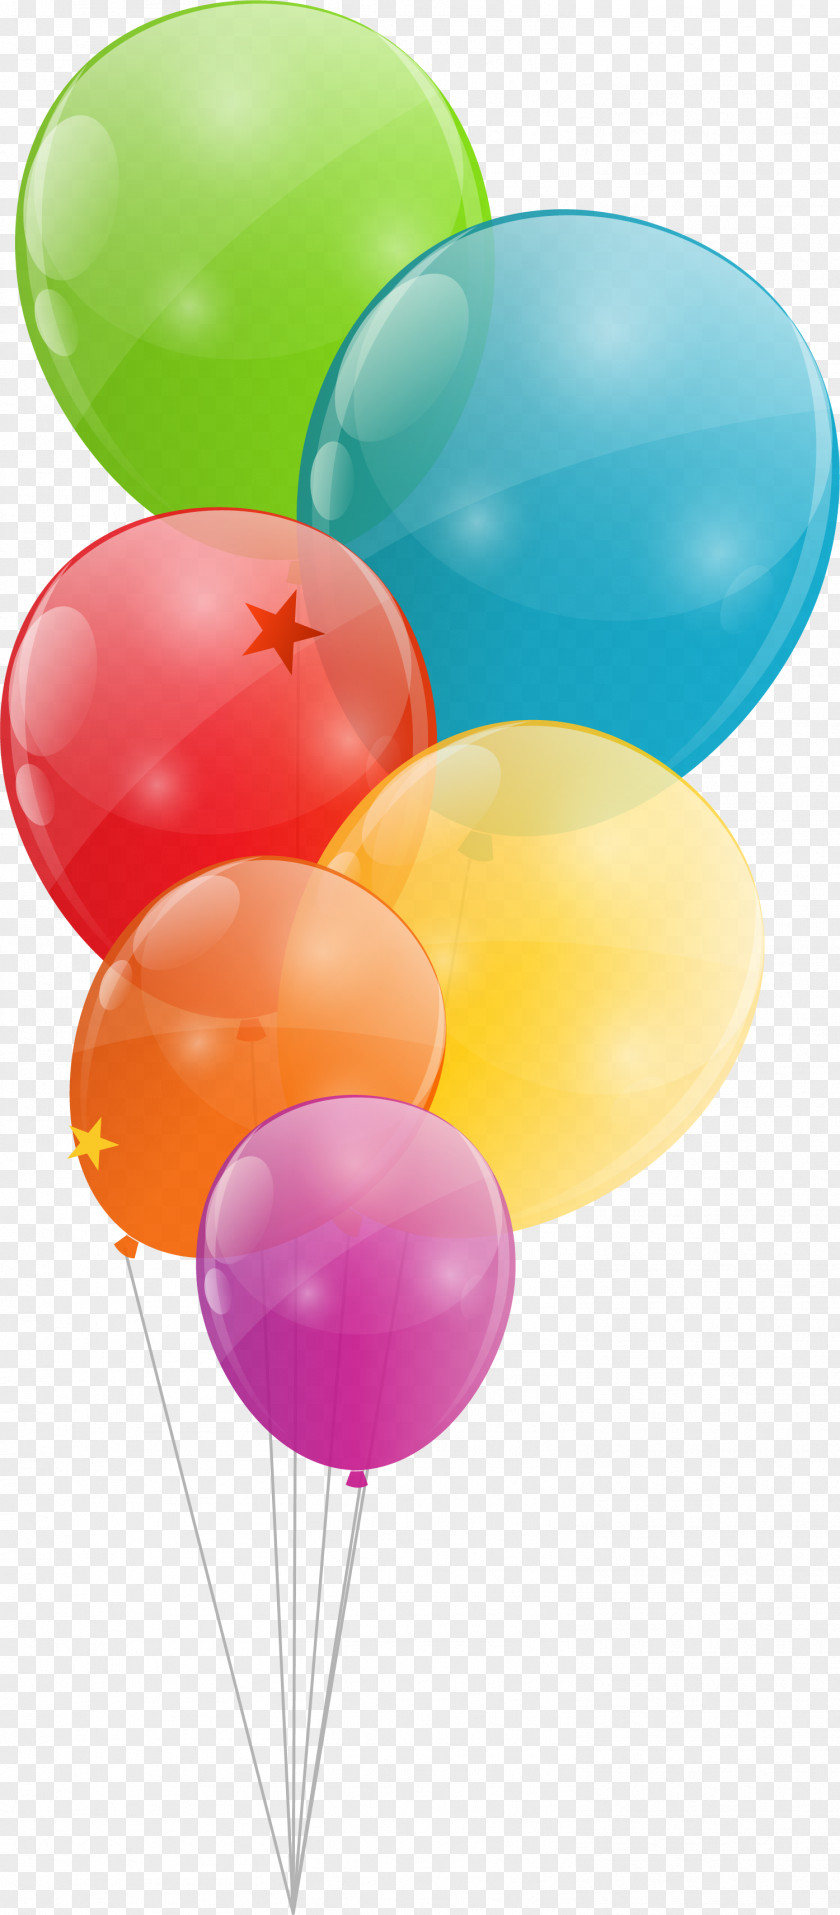 Colorful Balloon PNG